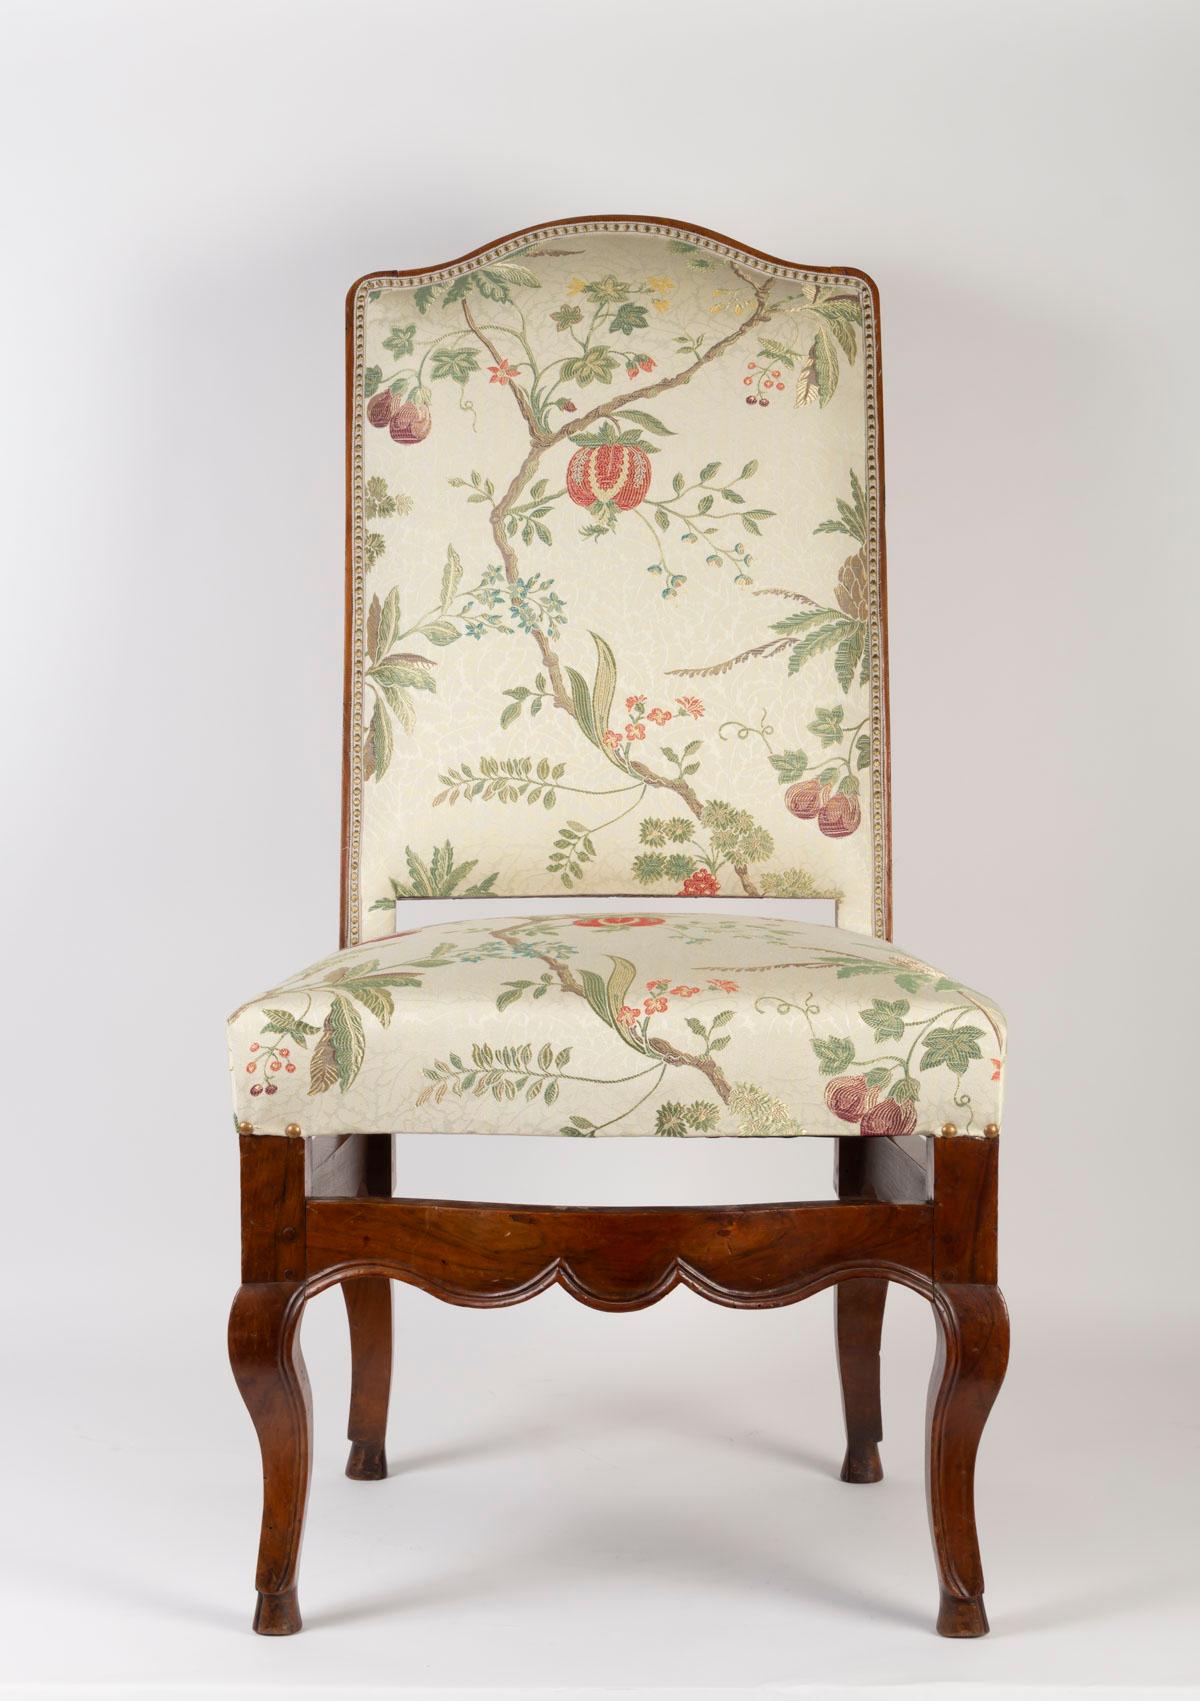 18th Century and Earlier Pair of Walnut Provençal Chairs, 18th Century Period